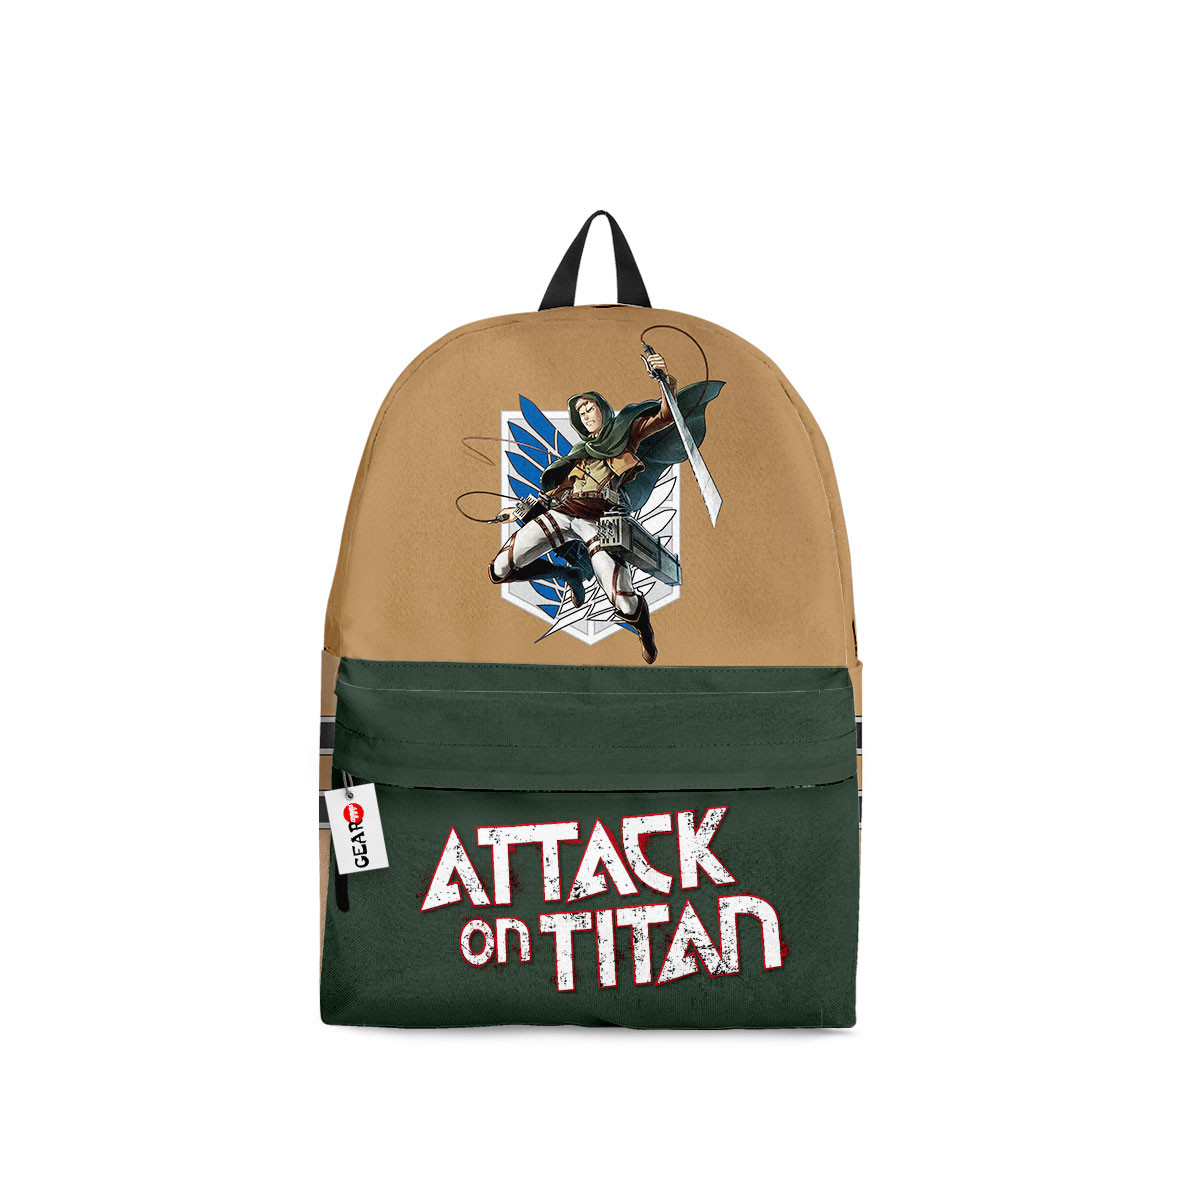 BEST Jean Kirstein Attack On Titan Anime Backpack Bag1